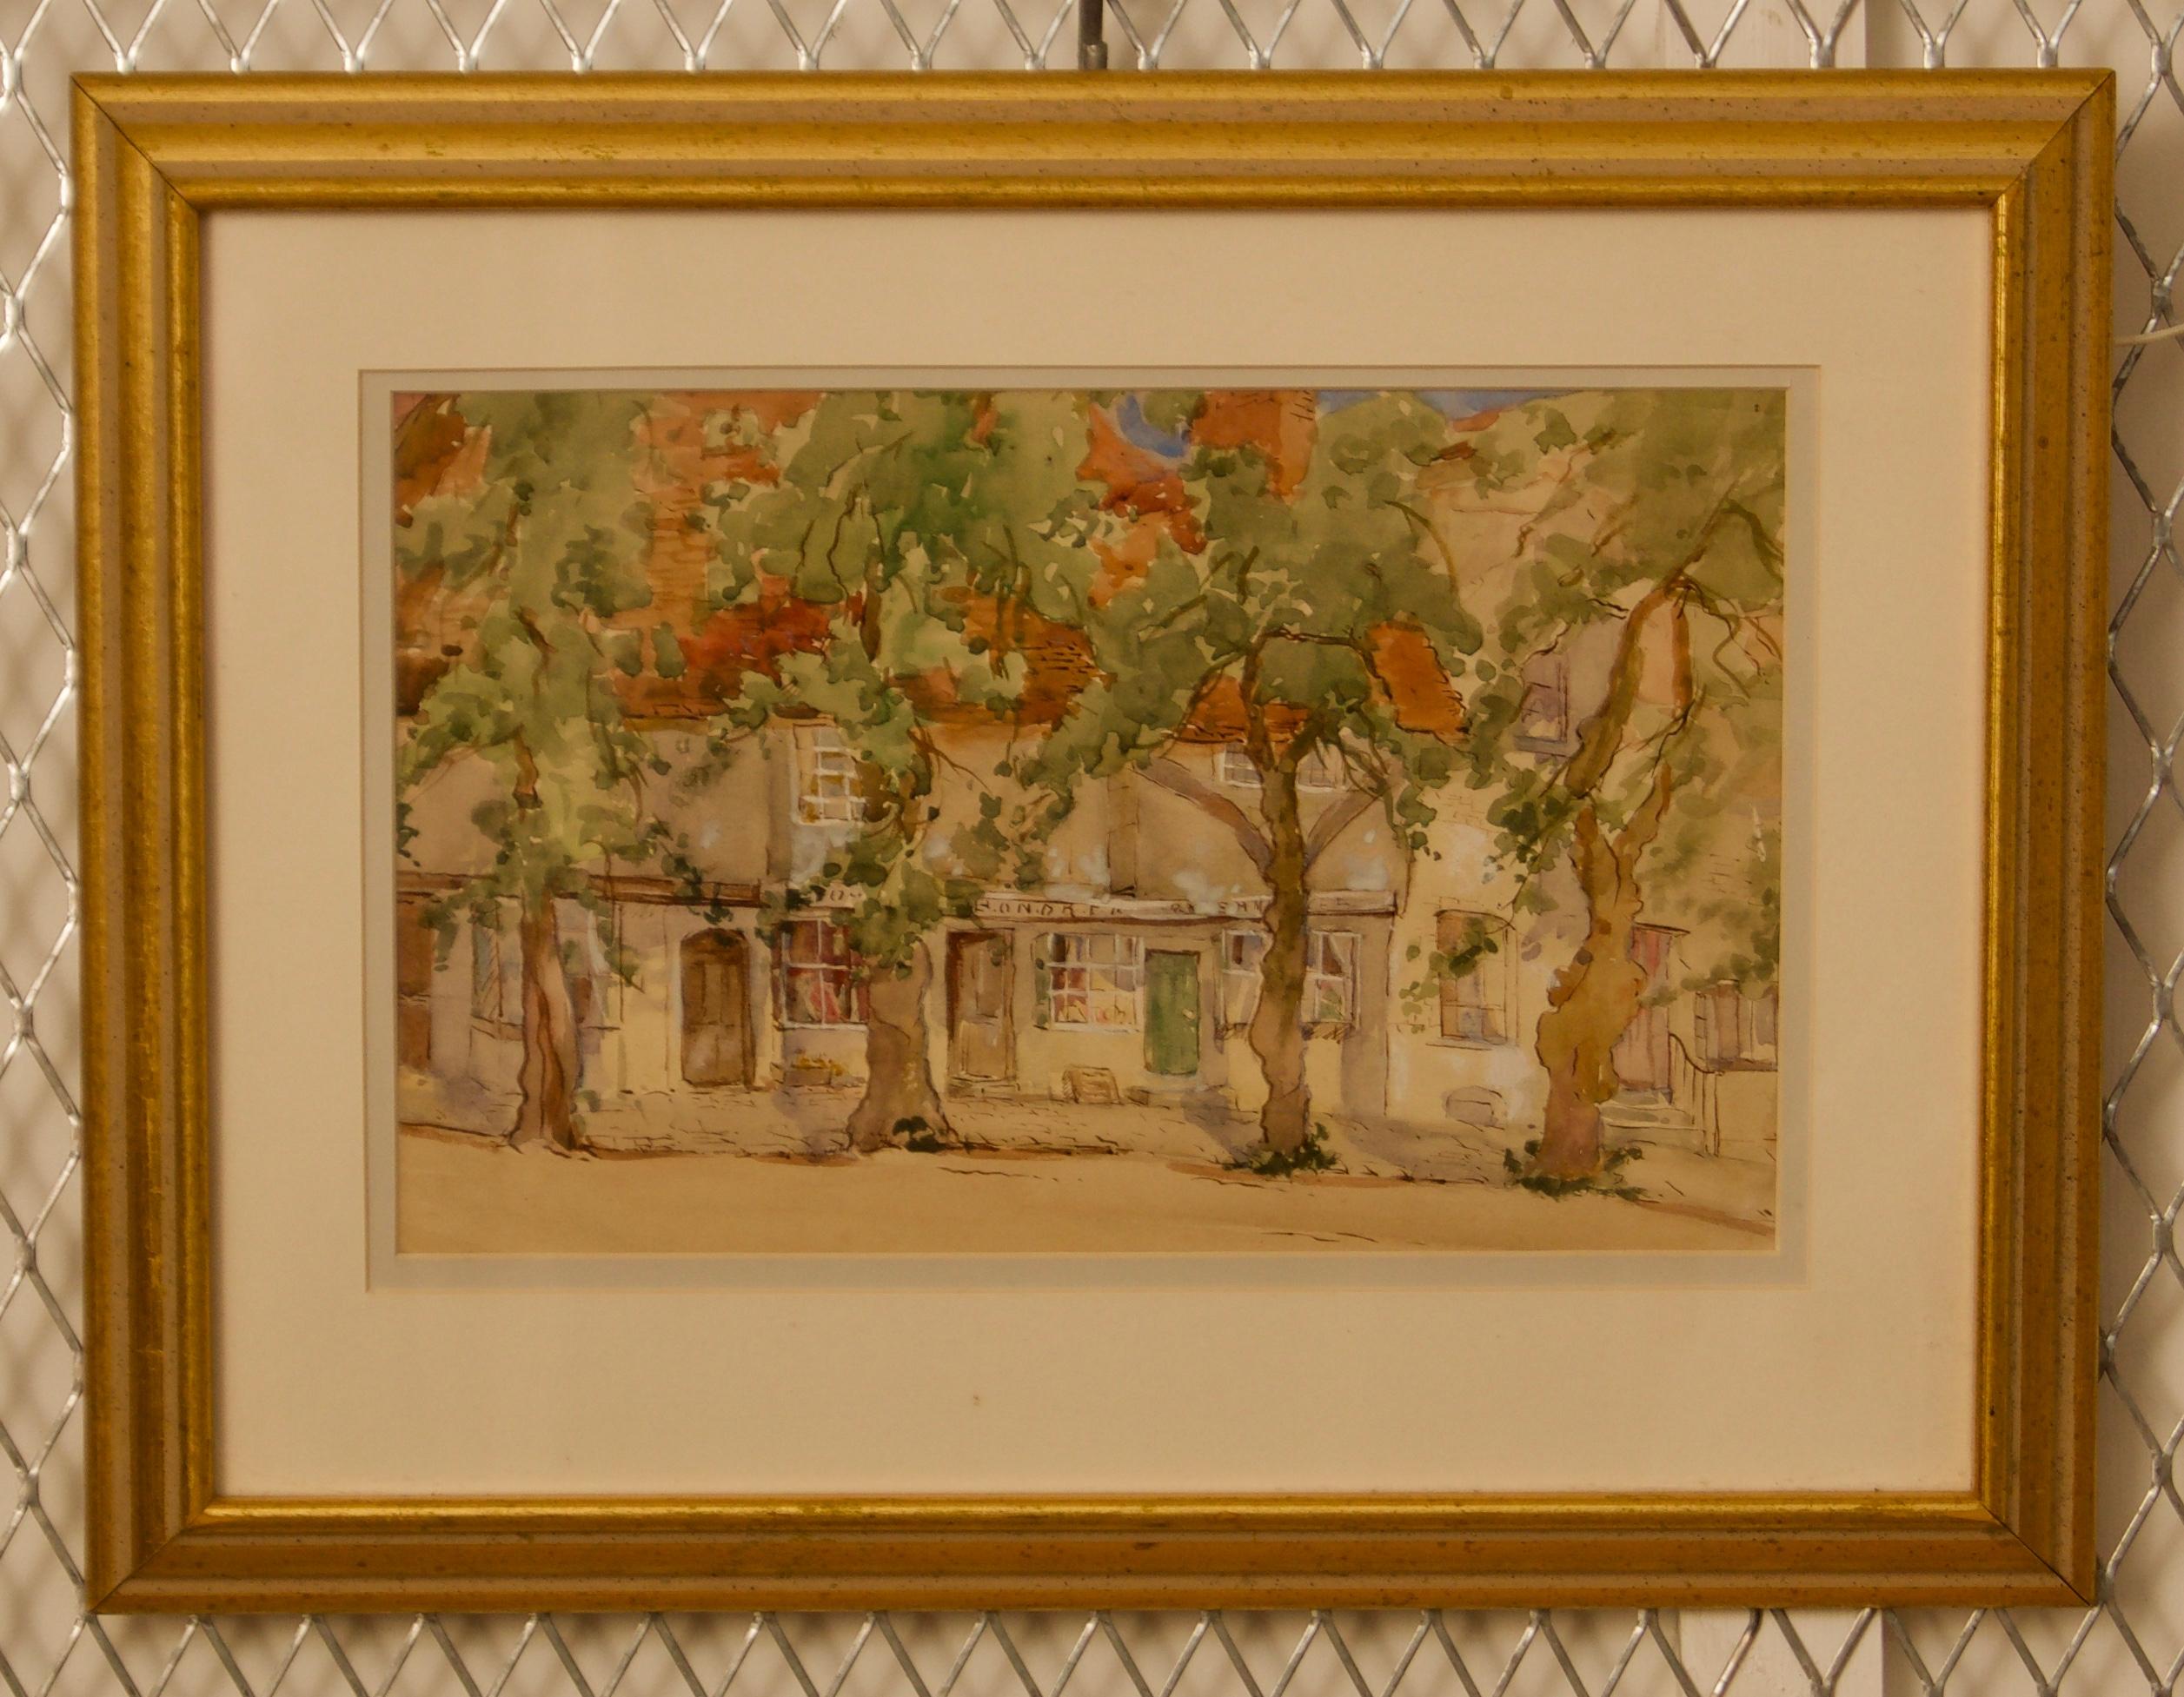 South of France - Early 20th Century Impressionist Watercolour by Bennett - Art by Sterndale Bennett